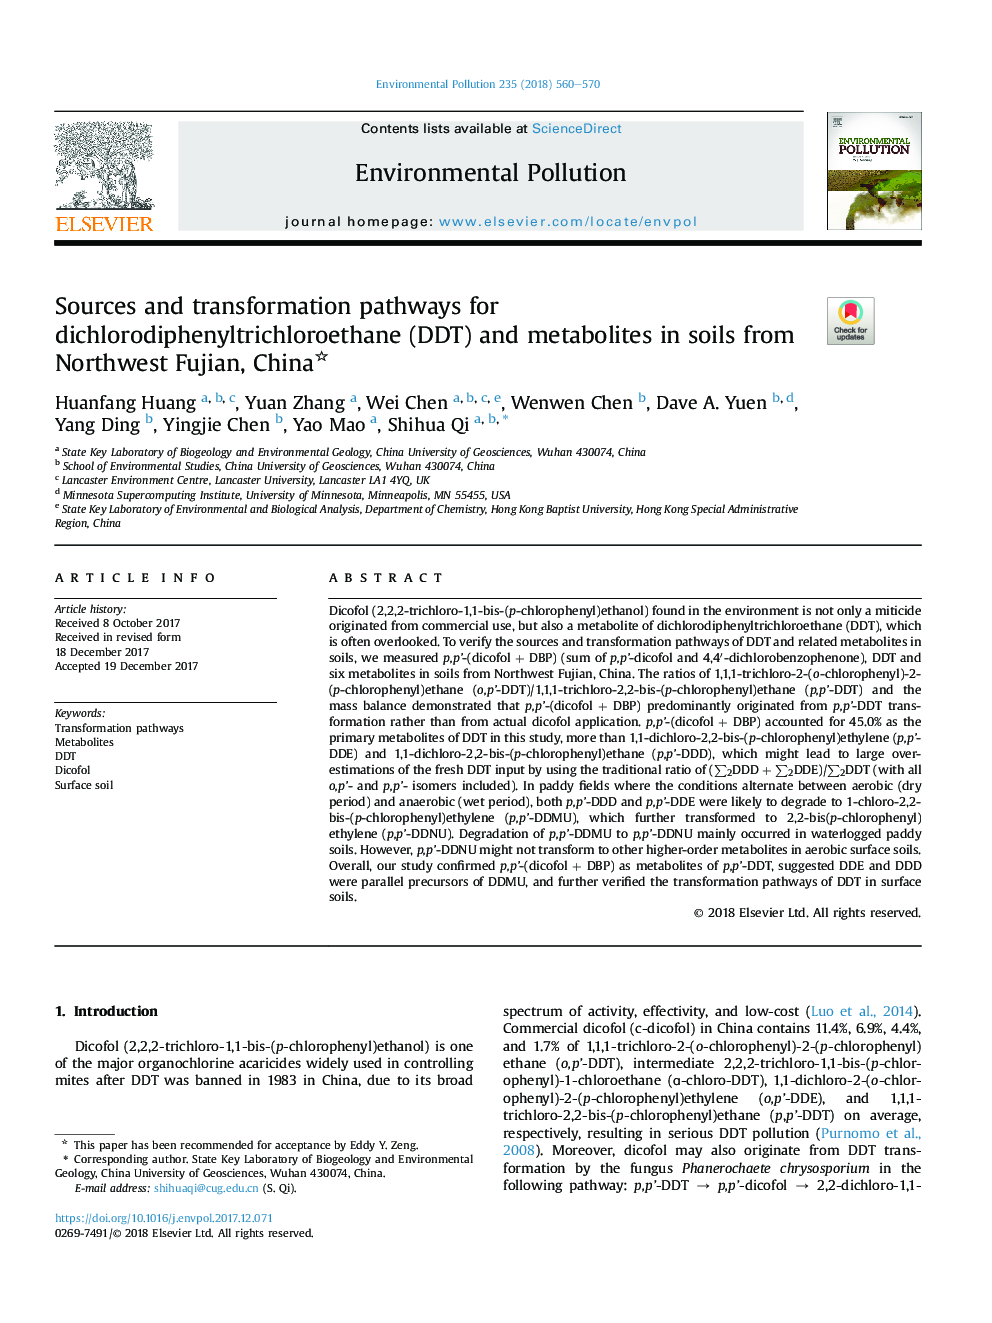 Sources and transformation pathways for dichlorodiphenyltrichloroethane (DDT) and metabolites in soils from Northwest Fujian, China